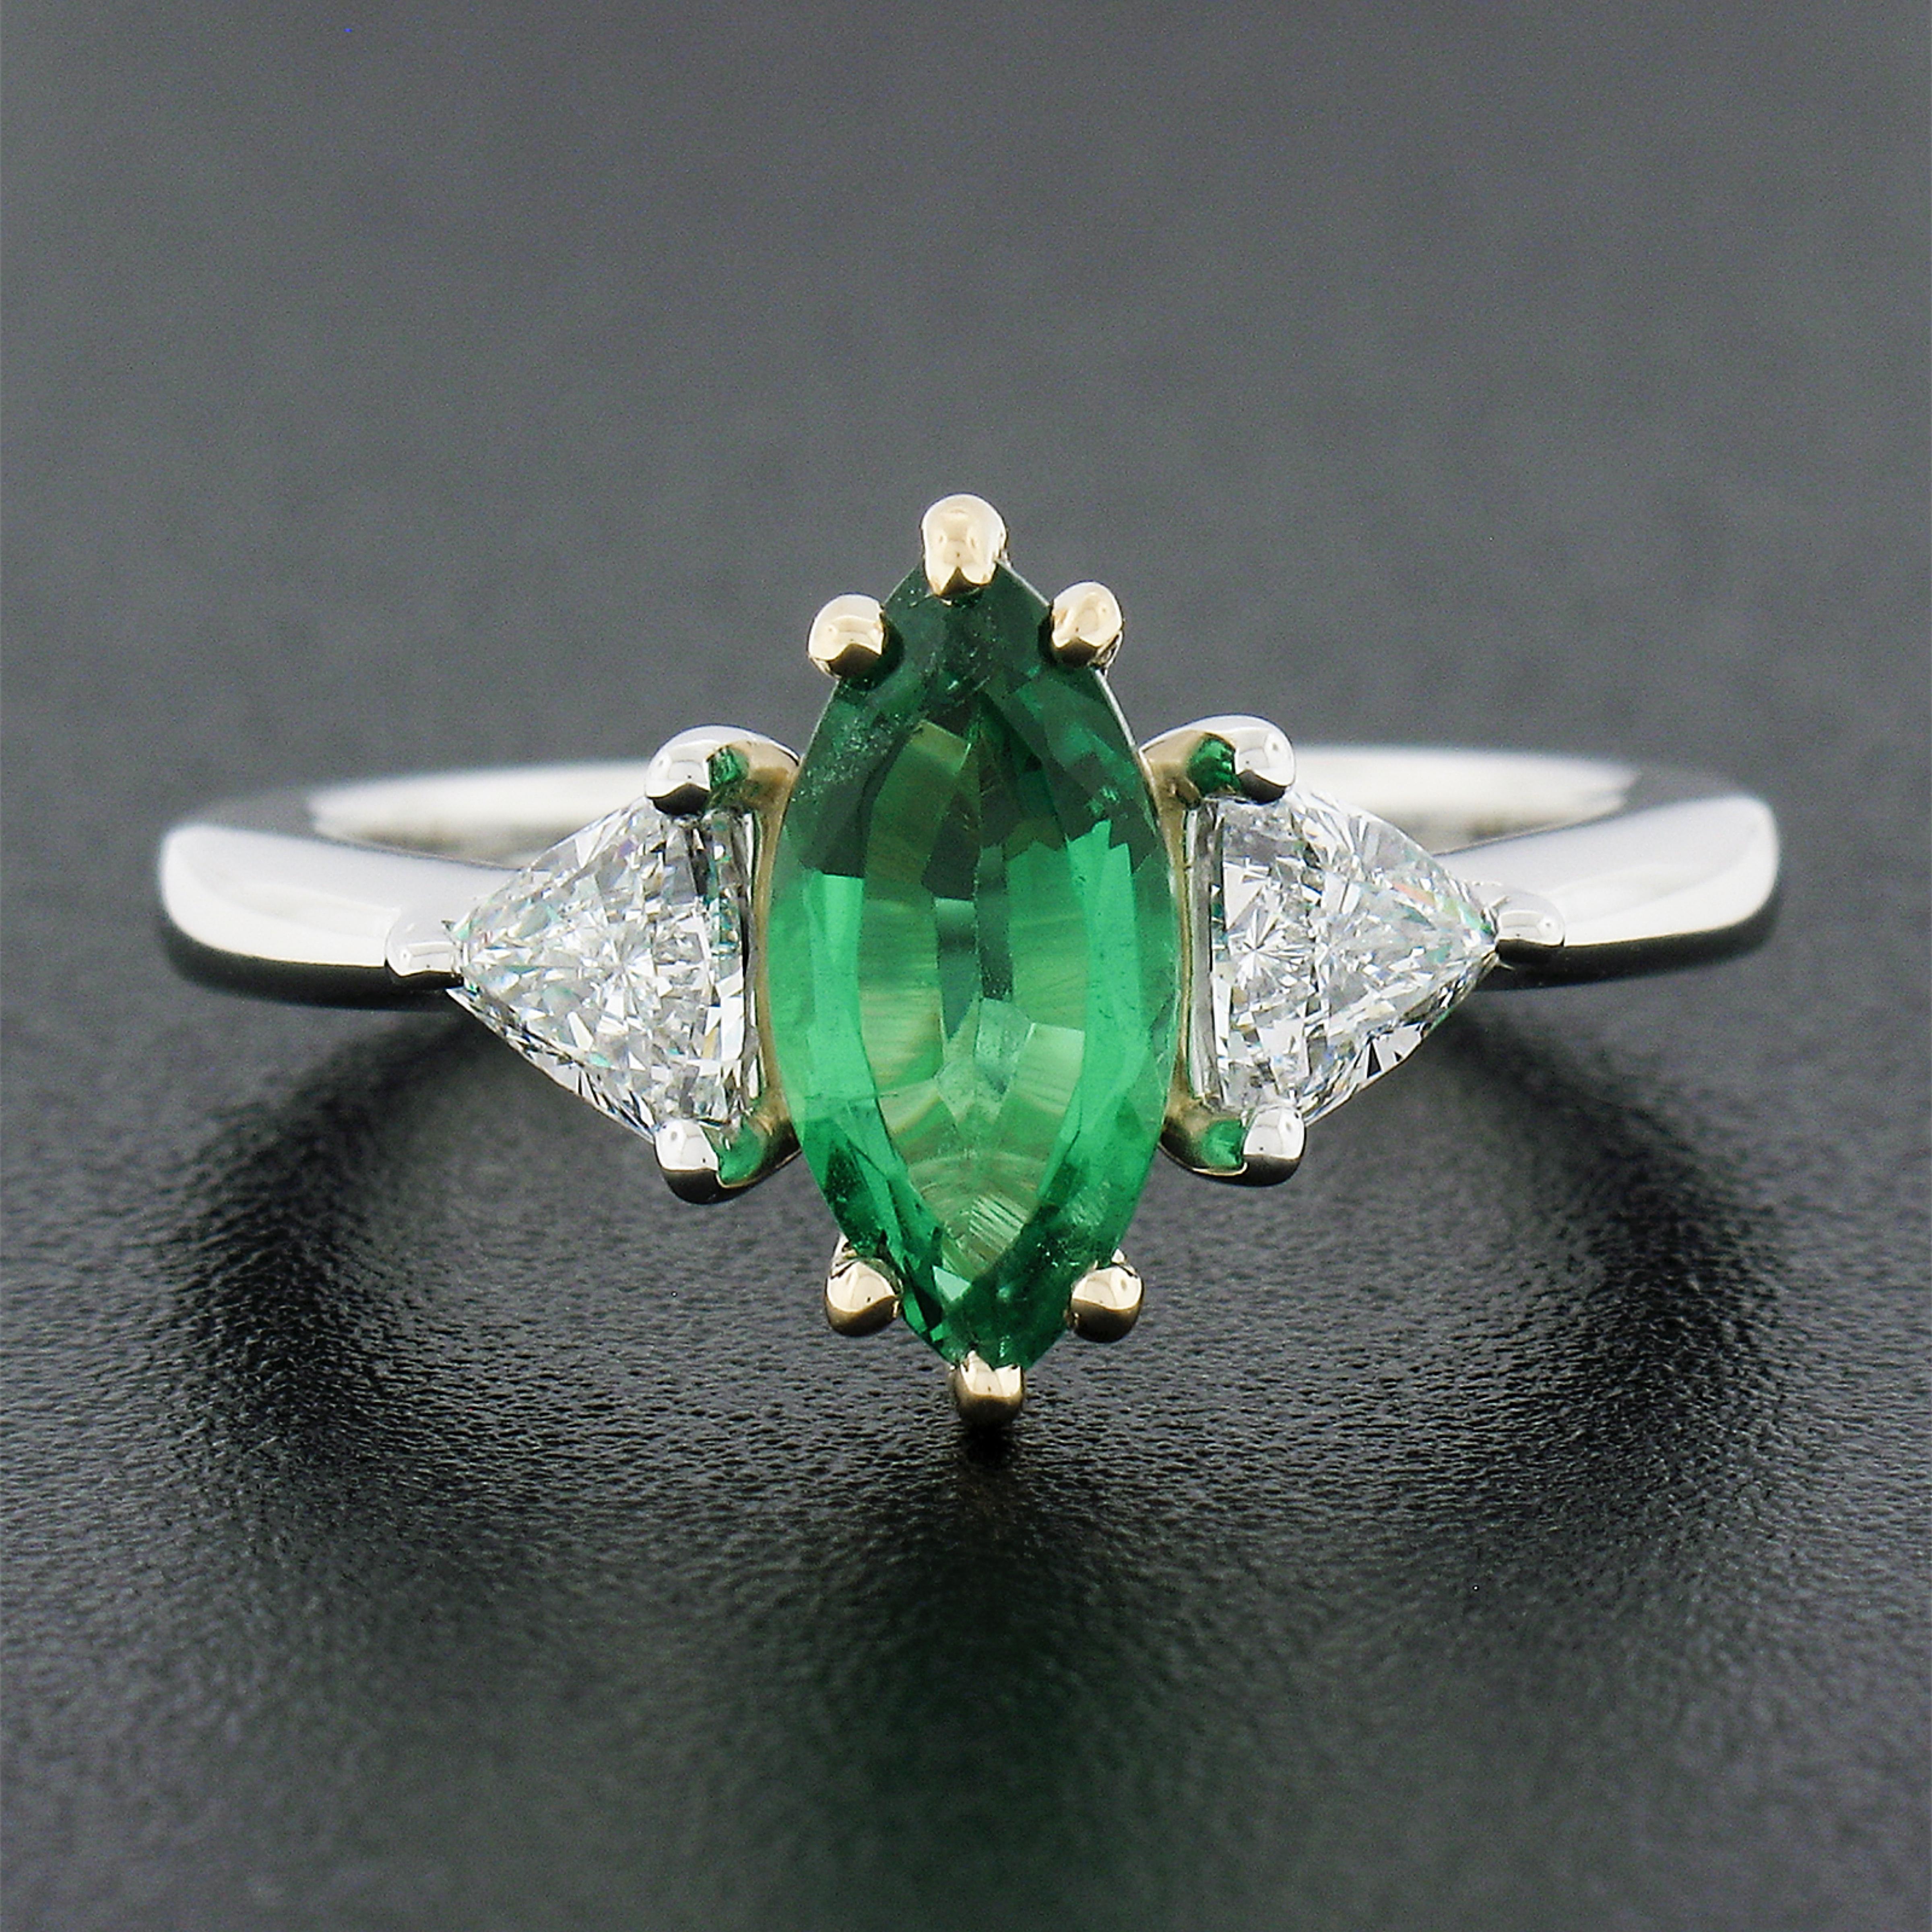 Here we have a magnificent emerald and diamond three-stone ring that is crafted in solid platinum with an 18k yellow gold center that features a gorgeous, GIA certified, natural emerald stone. The solitaire displays a very clean and truly incredible